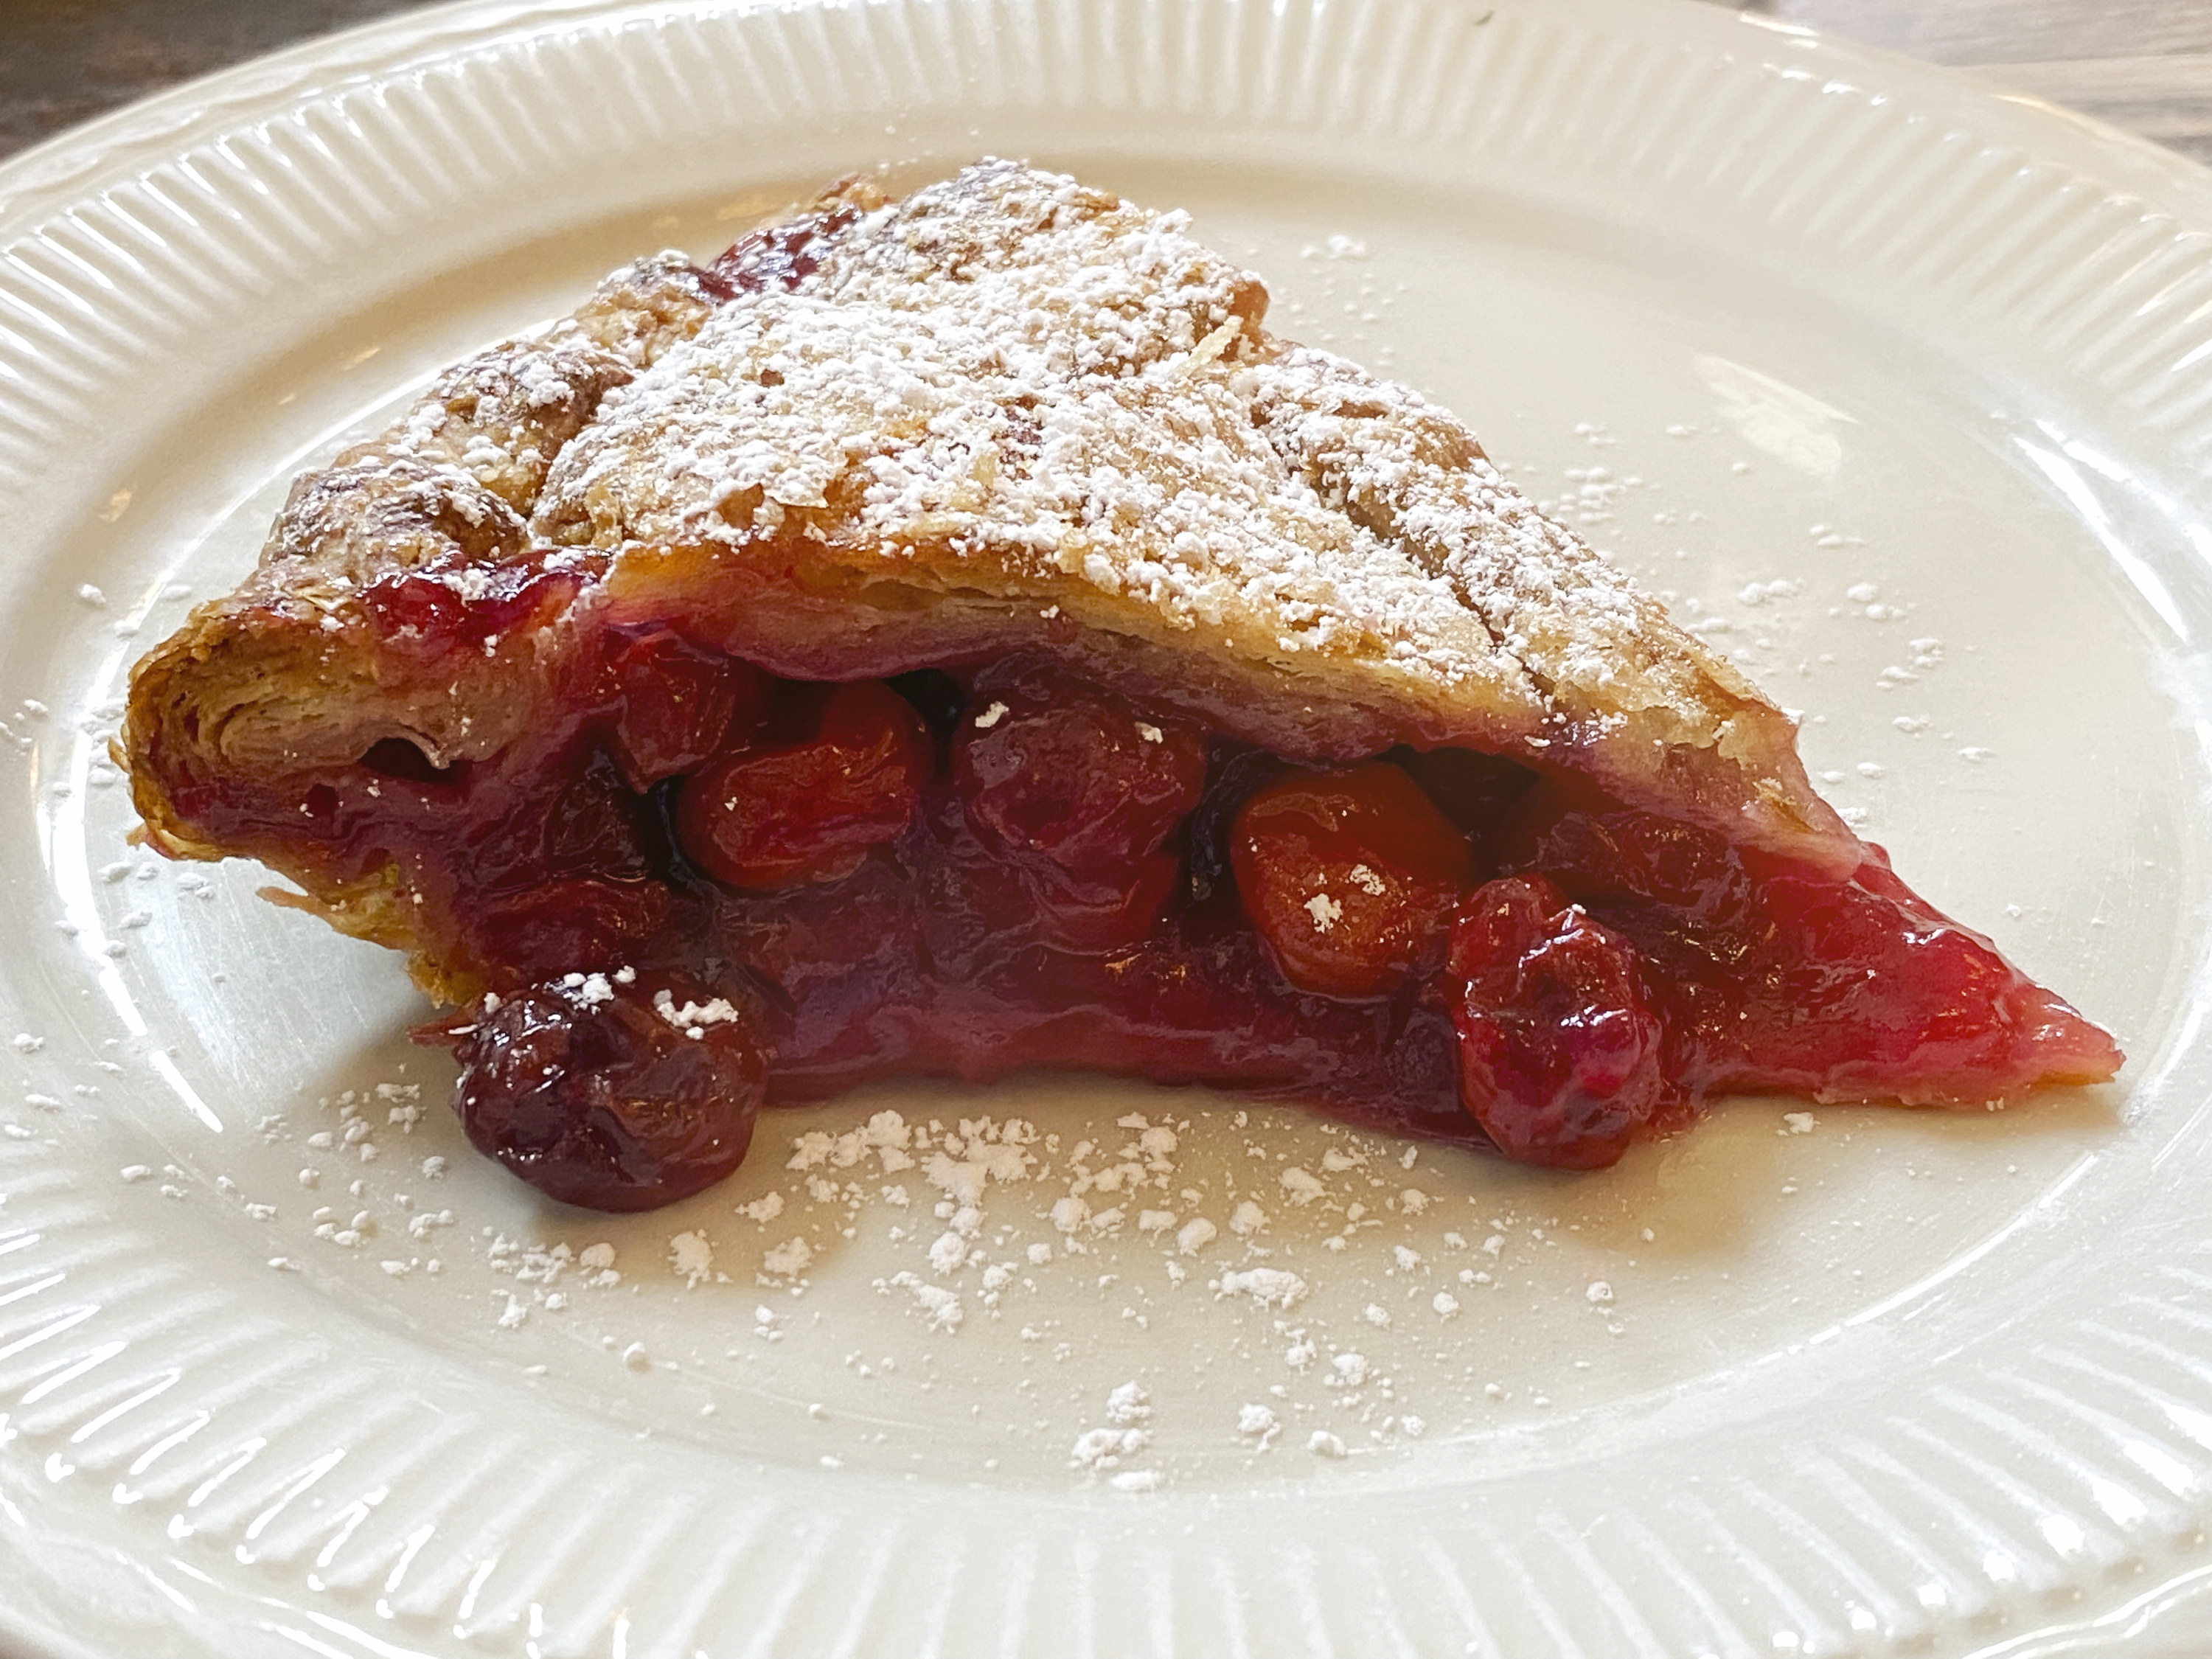 An image of a slice of cherry pie on a white plate, with icing sugar dusted on top of the pie&#x27;s crust